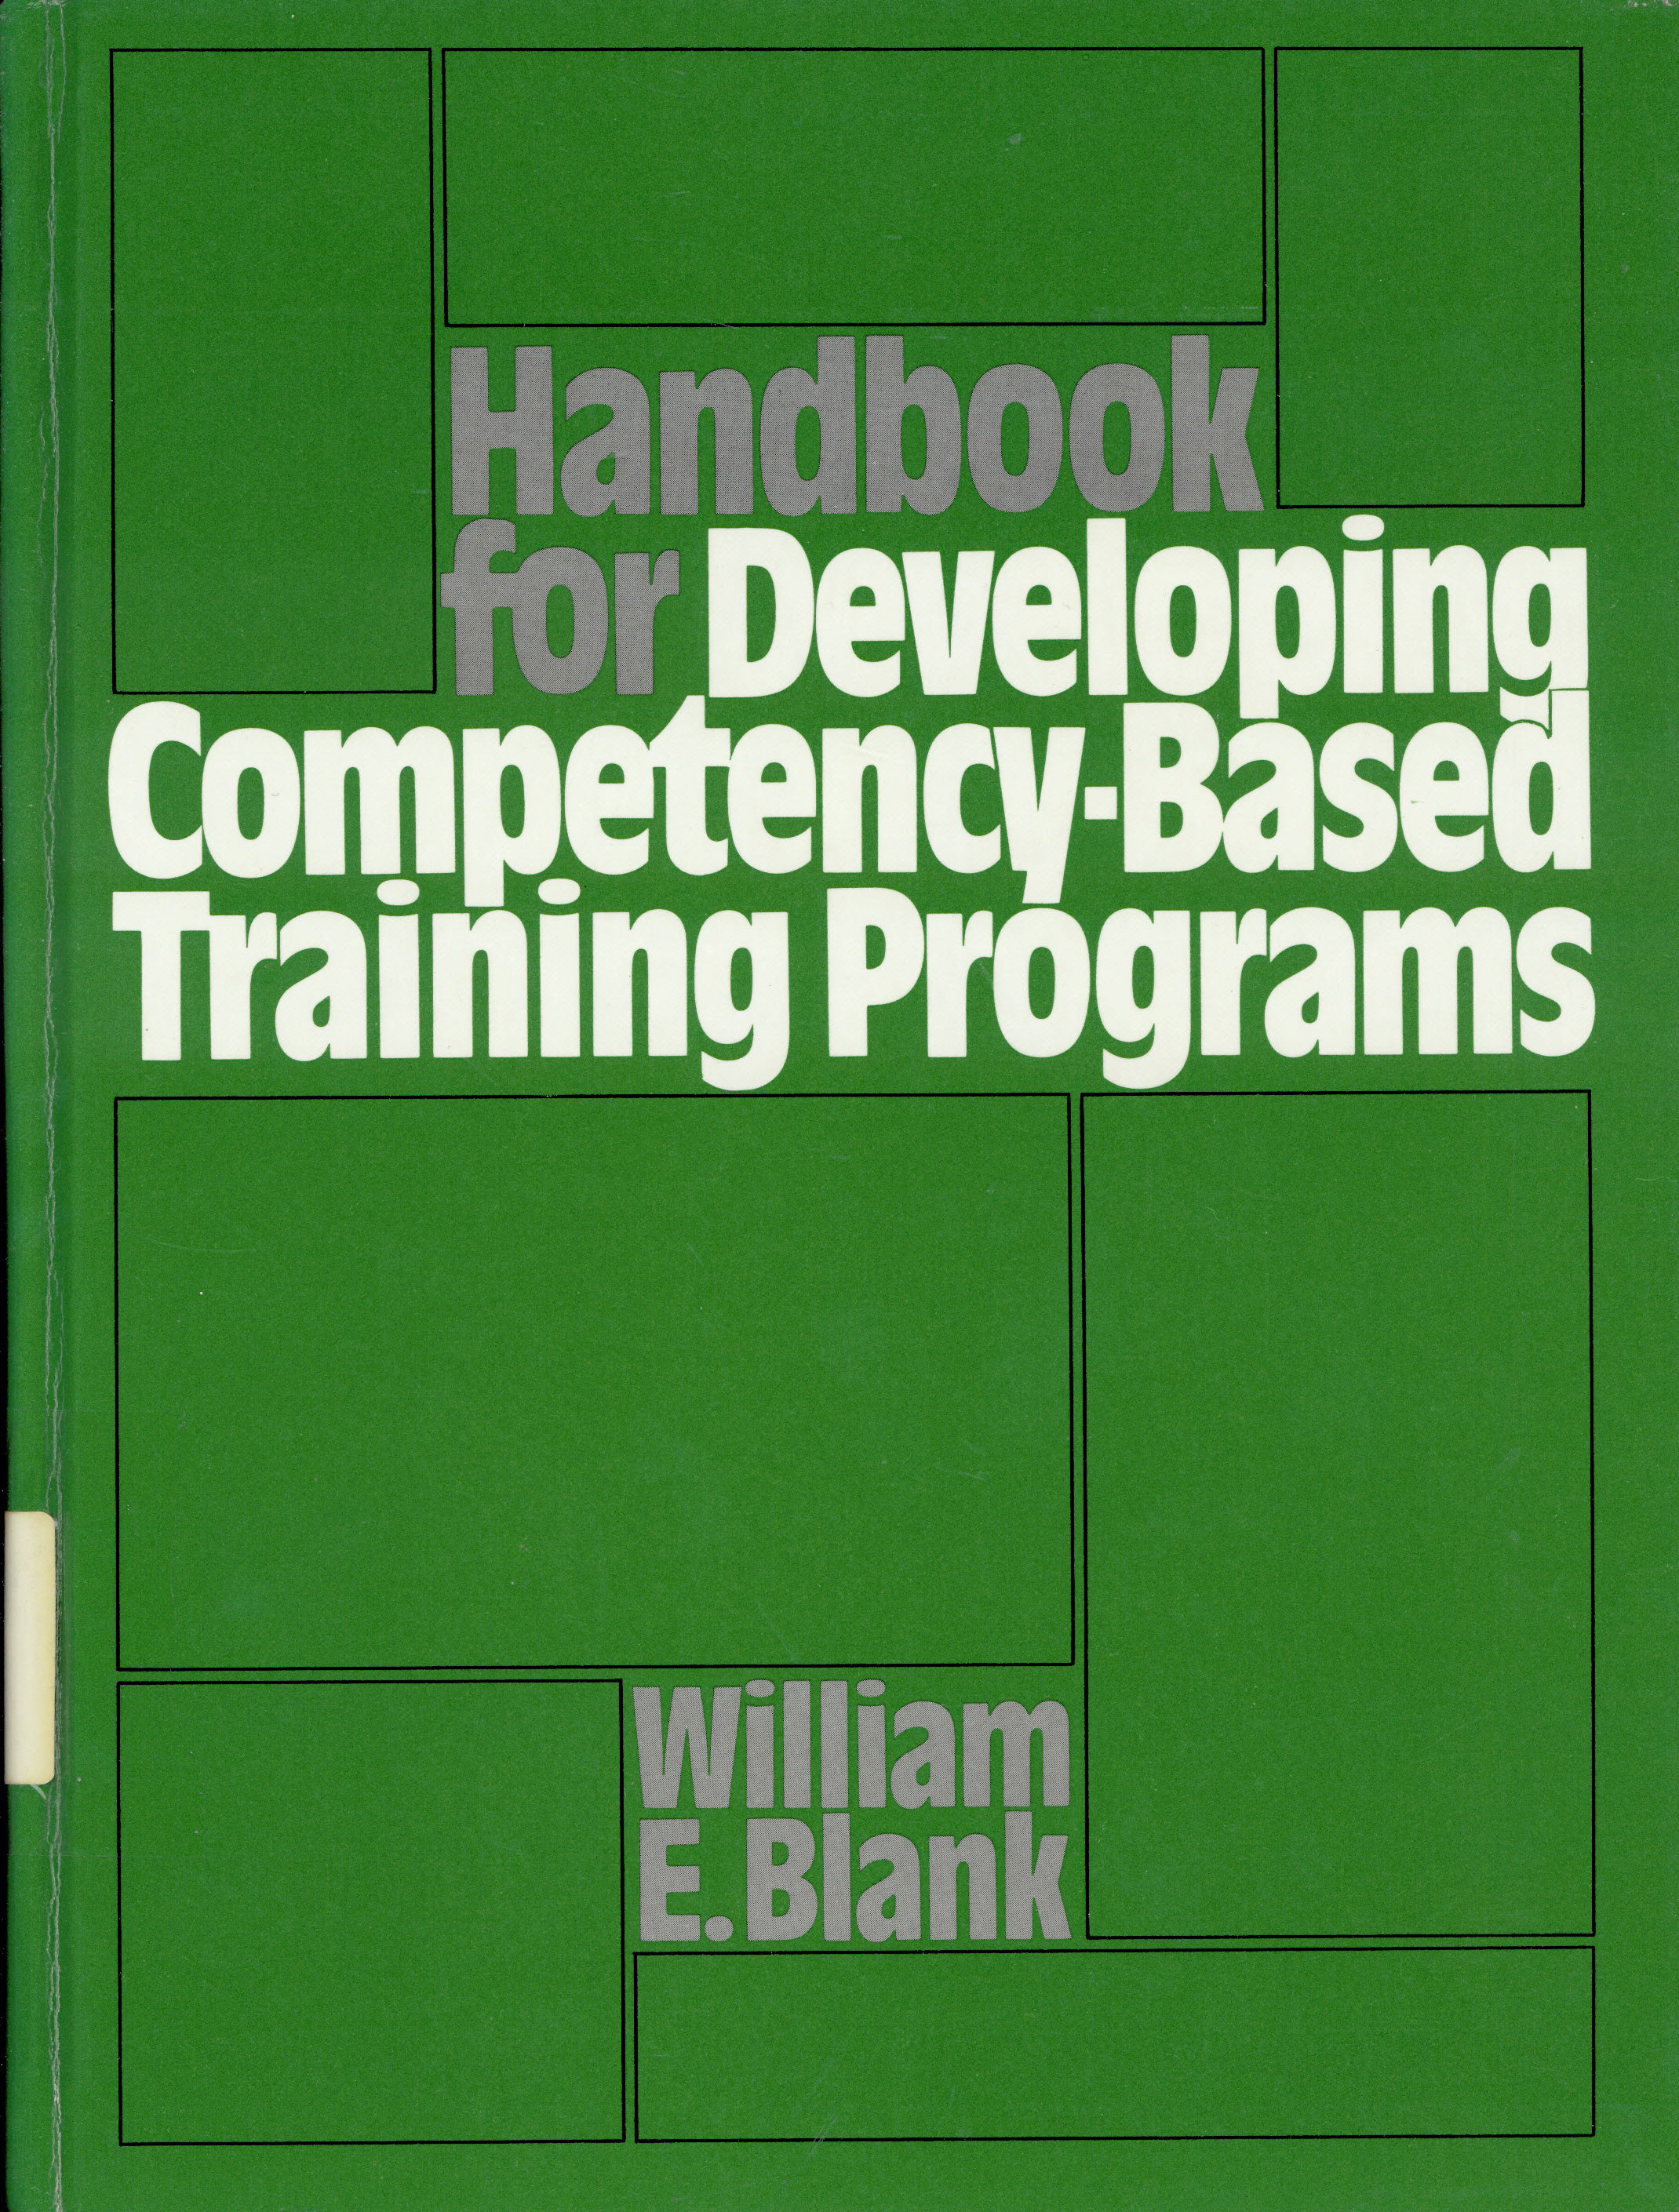 Handbook for developing competency-based training programs